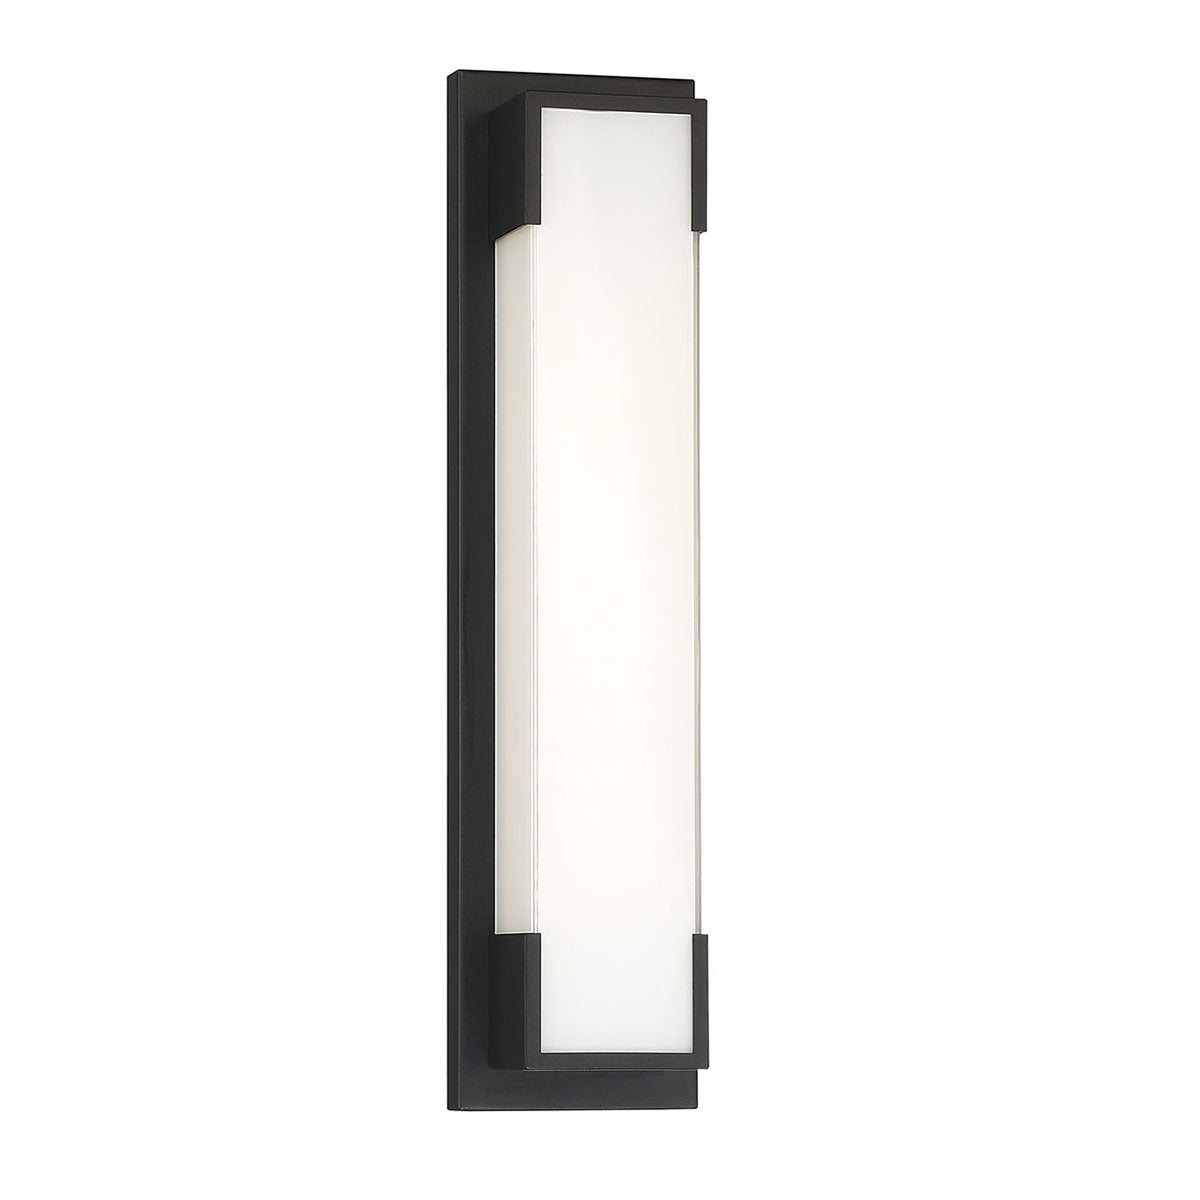 THORNHILL Outdoor sconce Black - 37074-012 INTEGRATED LED | EUROFASE